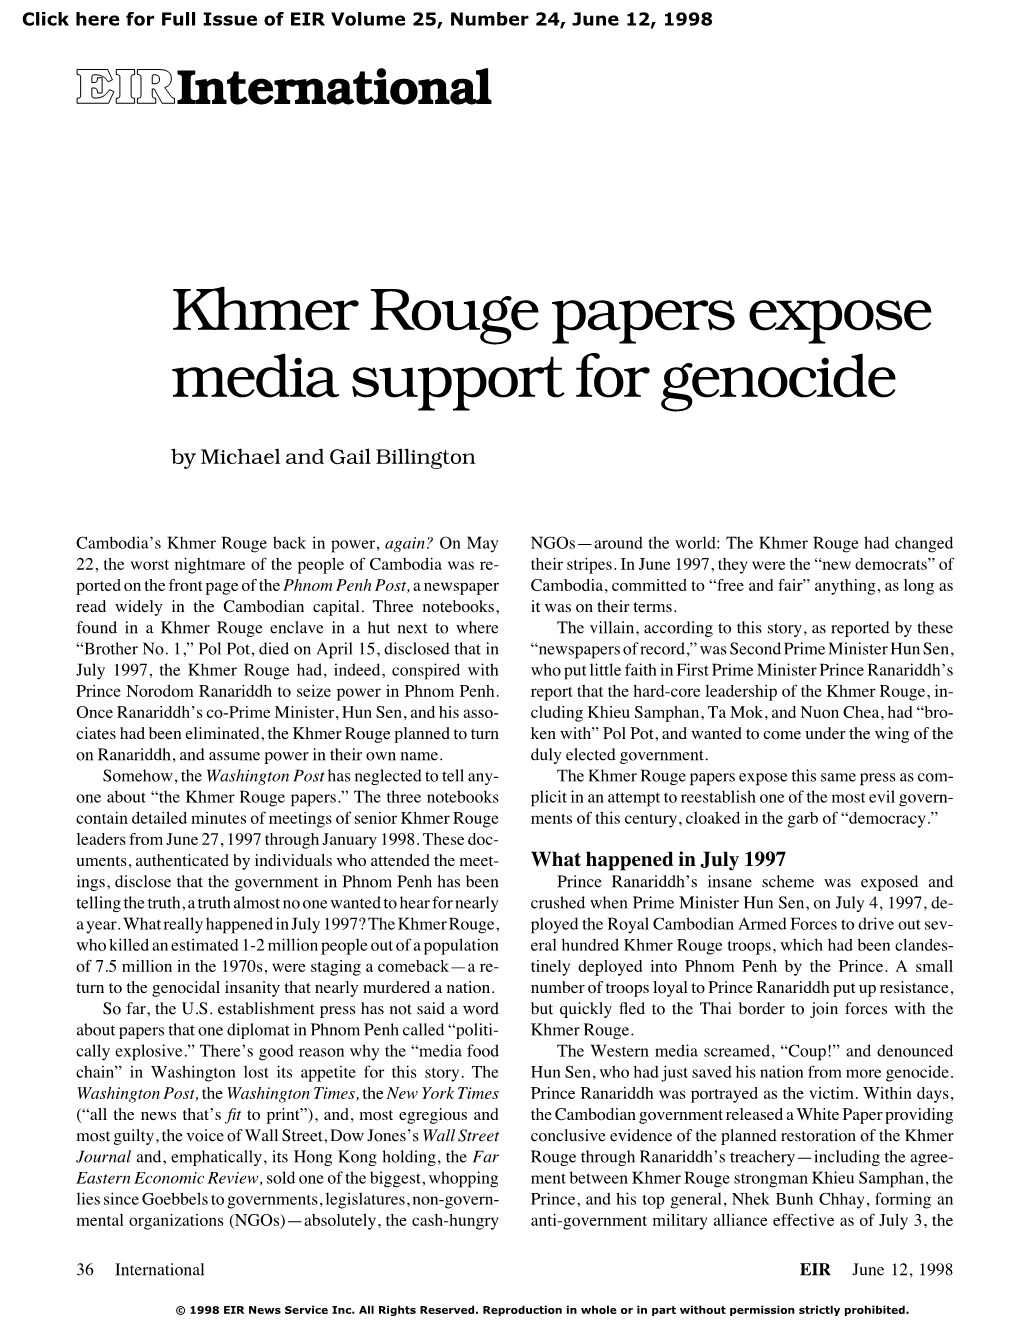 Khmer Rouge Papers Expose Media Support for Genocide